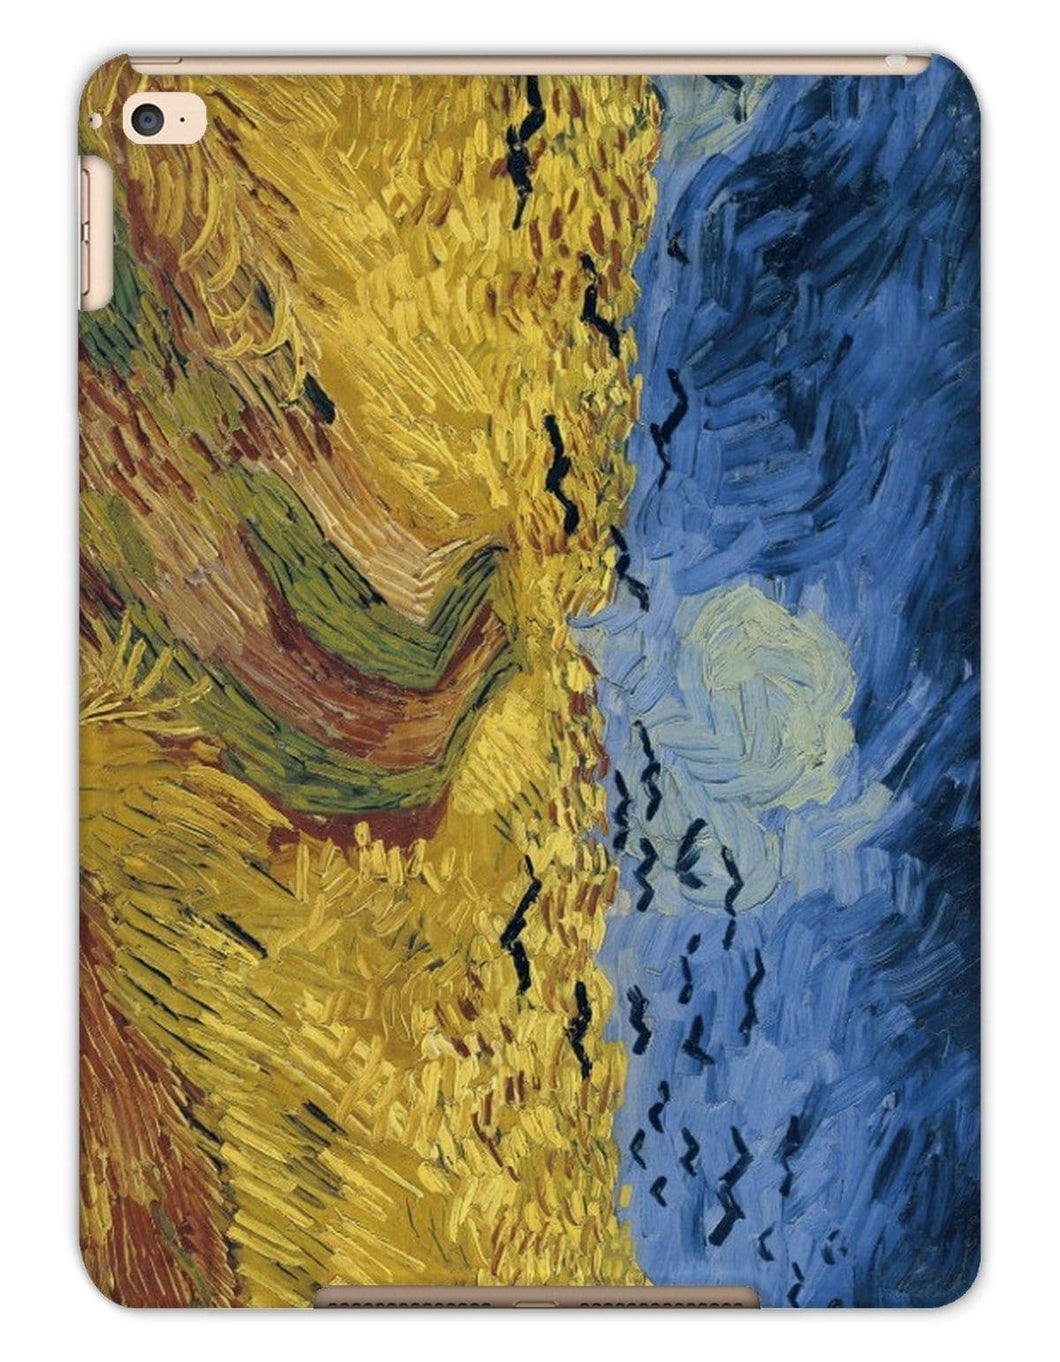 Wheatfield with Crows by Vincent van Gogh. iPad Air 2 / Matte - Exact Art